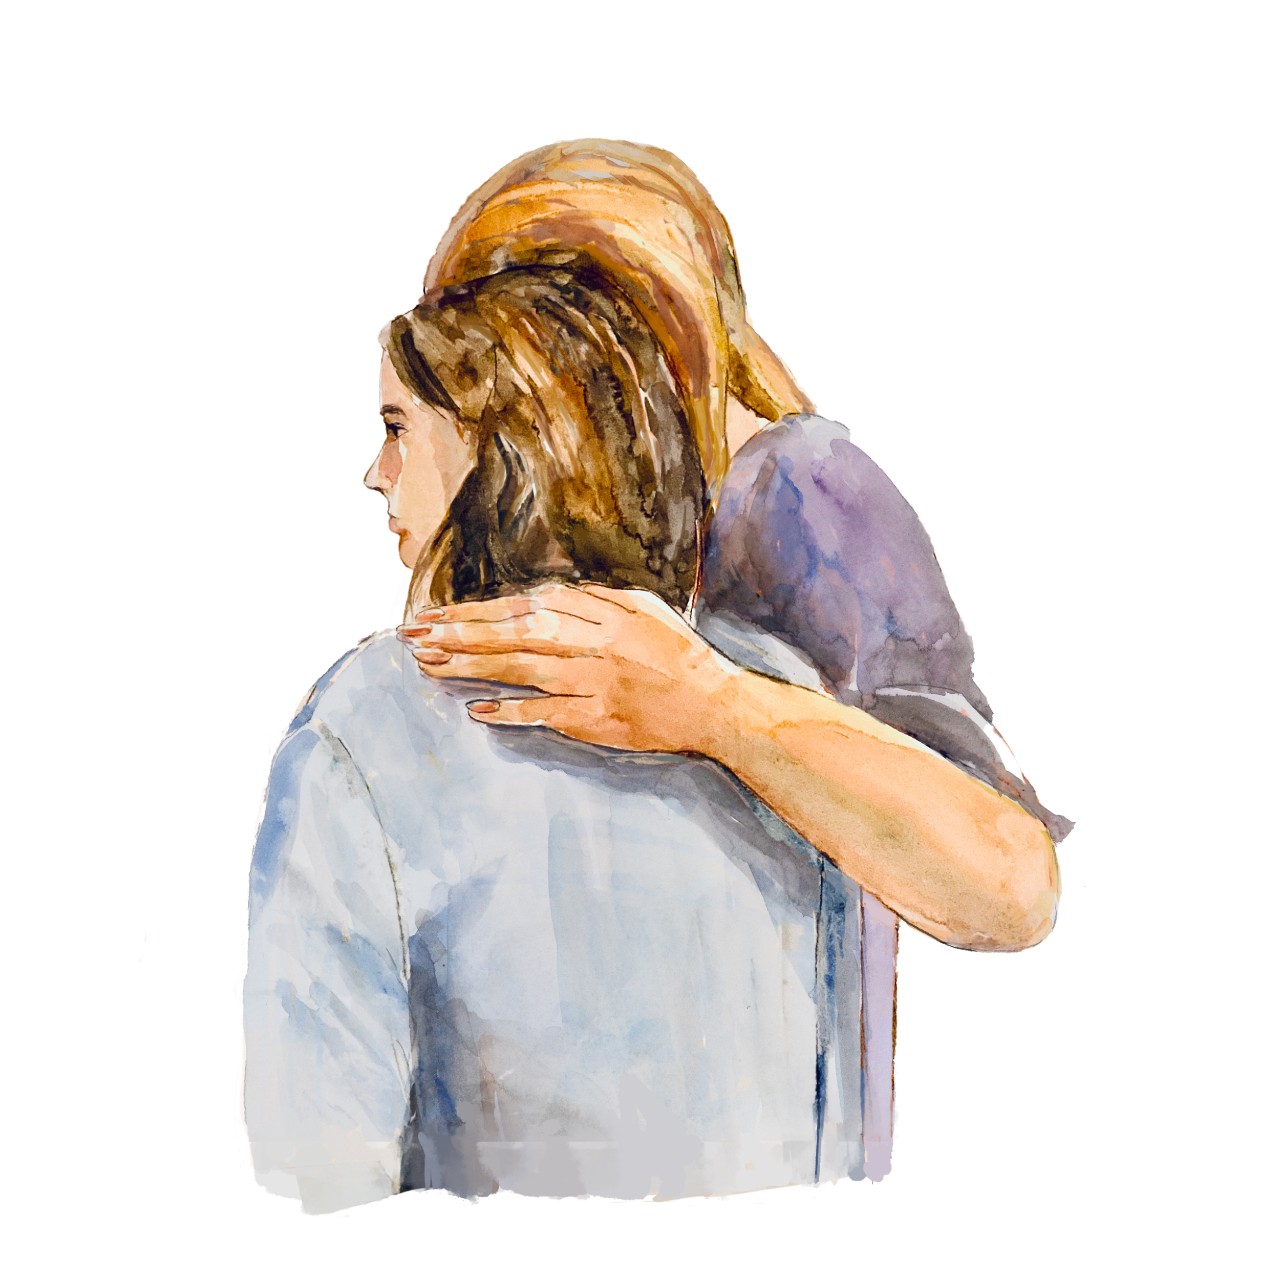 Illustration of friends comforting